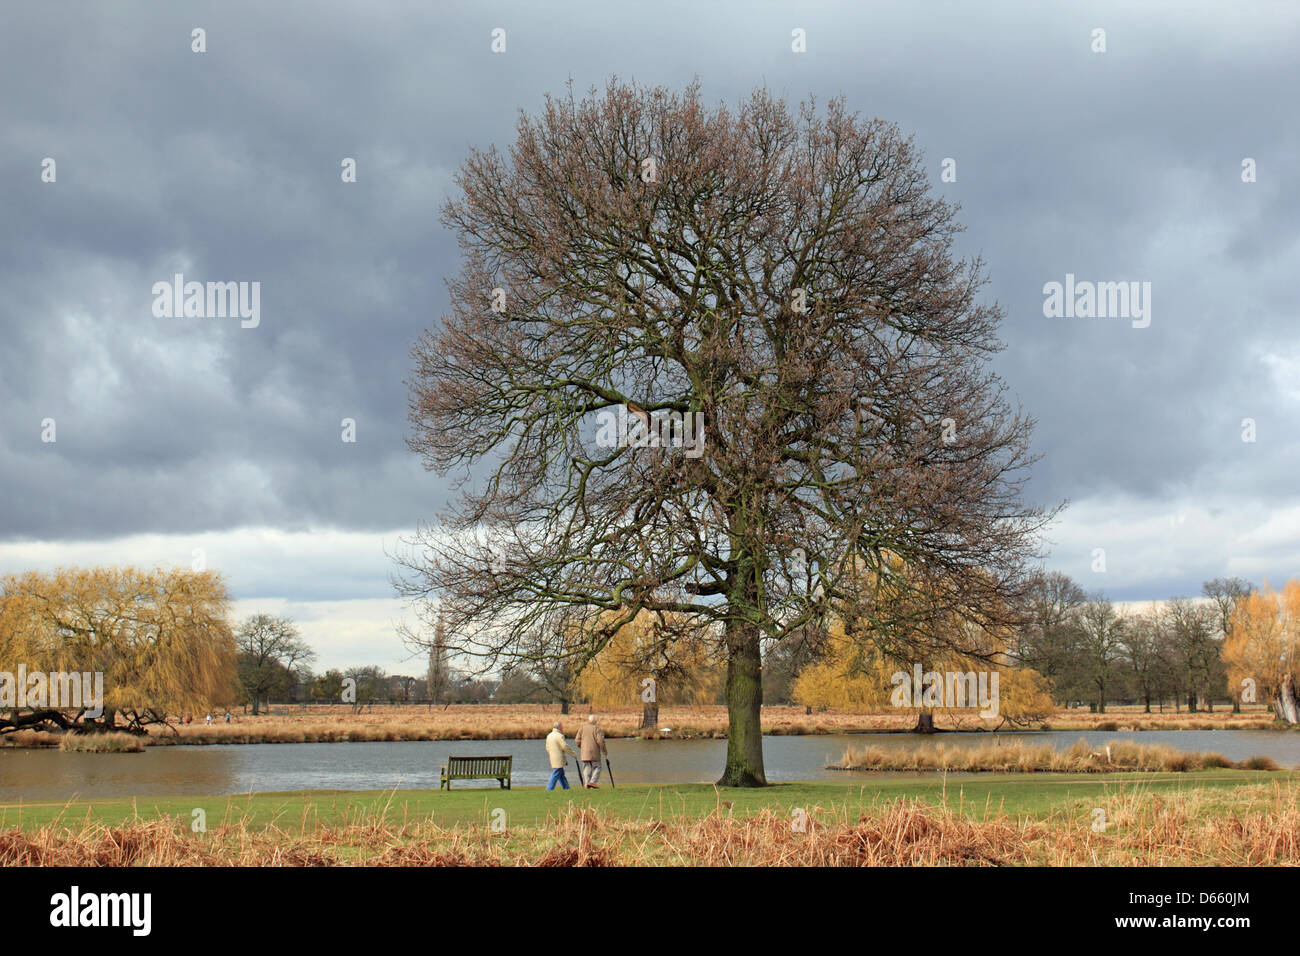 The Heron Pond in Bushy Park, SW London, England, UK.  12th April 2013. Stormy skies and heavy rain were the latest weather conditions in Southern England today. These two men take a walk by the pond between the showers. Credit: Julia Gavin / Alamy Live News Stock Photo